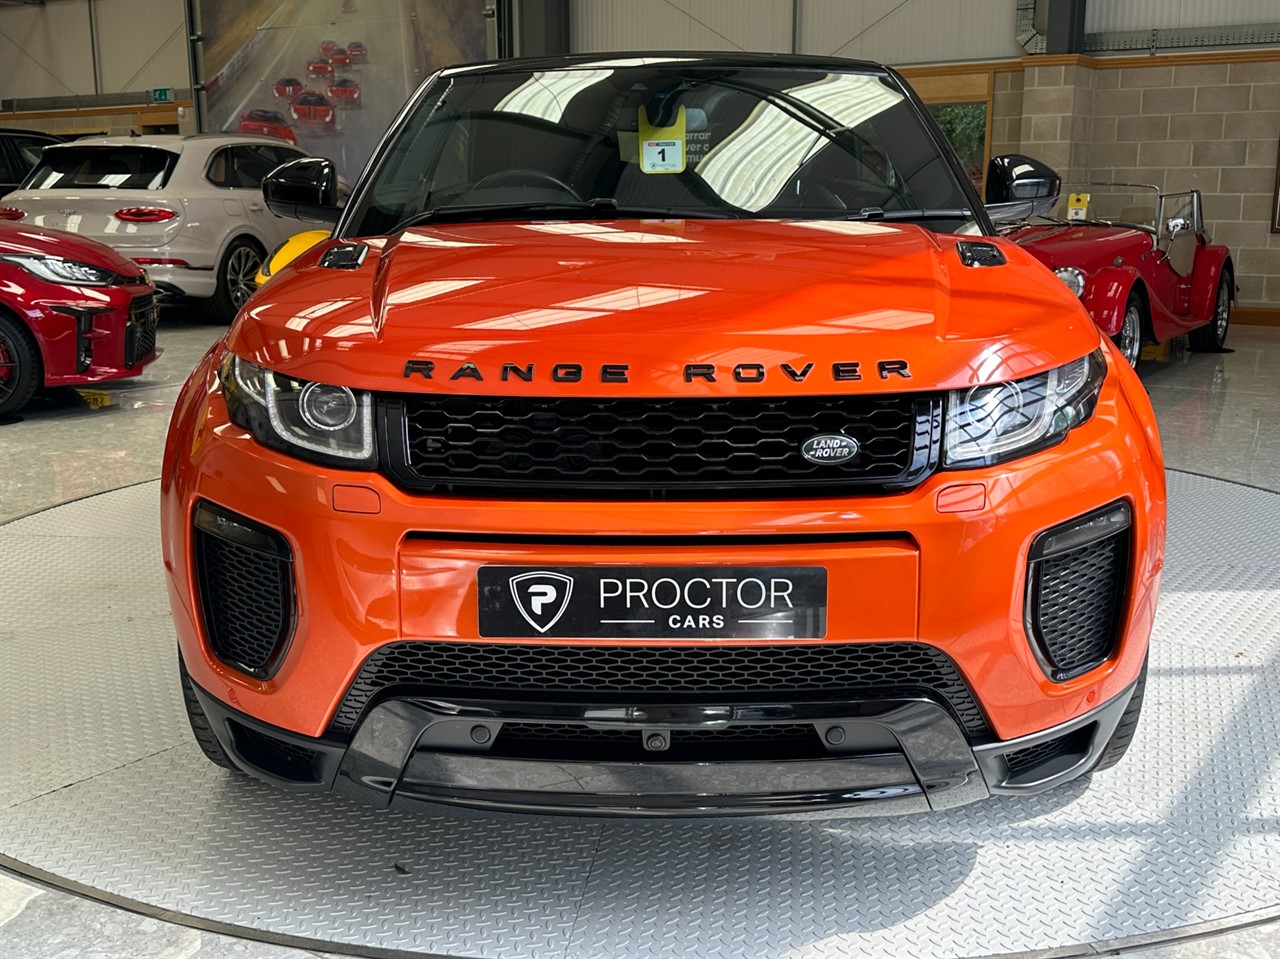 Used Land Rover Range Rover Evoque for sale in Wessington, Derbyshire